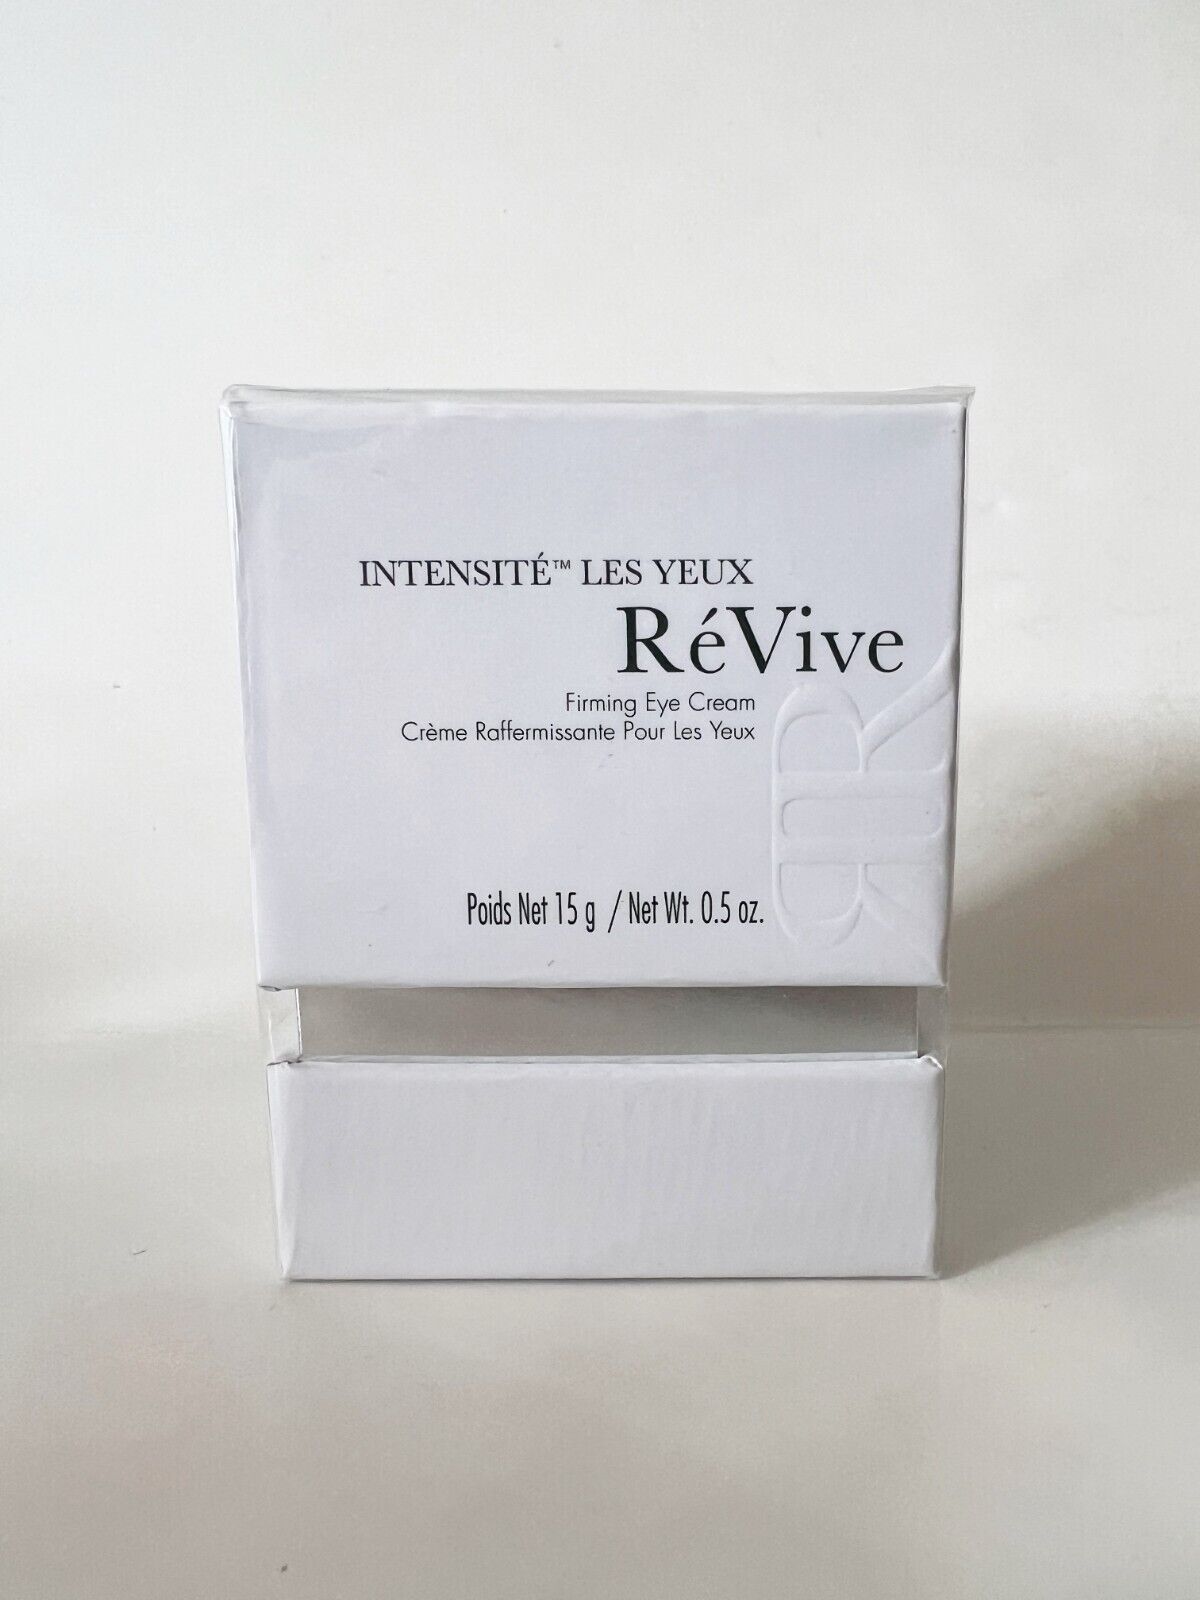 REVIVE INTENSITE LES YEUX FIRMING EYE CREAM 0.5 OZ BOXED - $147.00